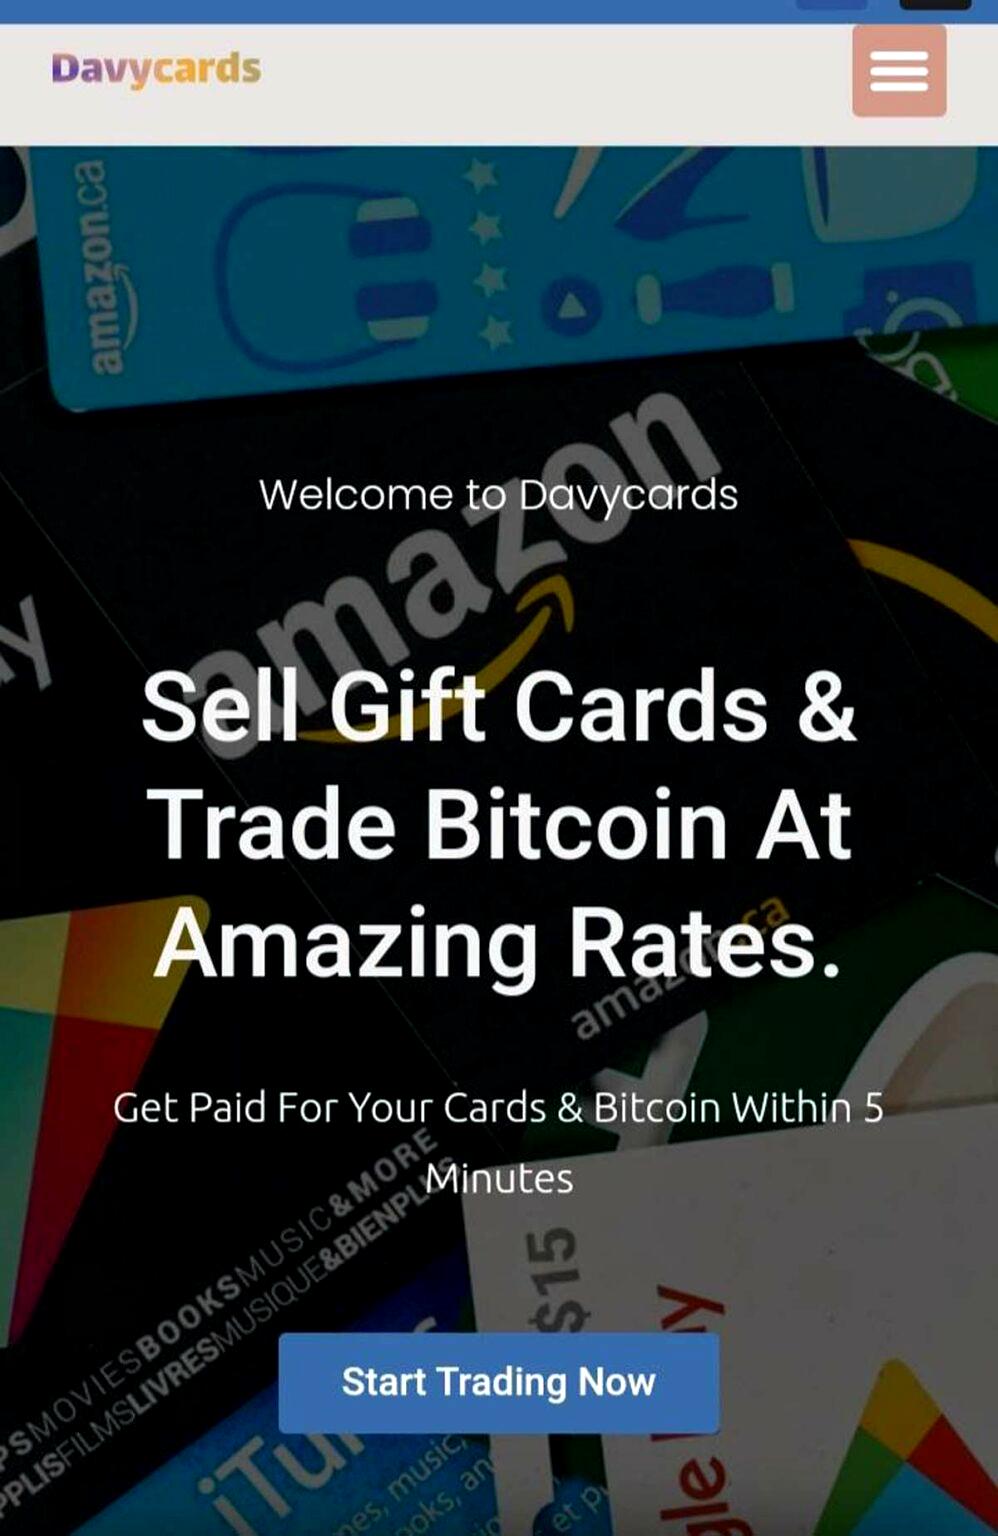 [SPONSORED]Best sites to sell gift cards instantly in